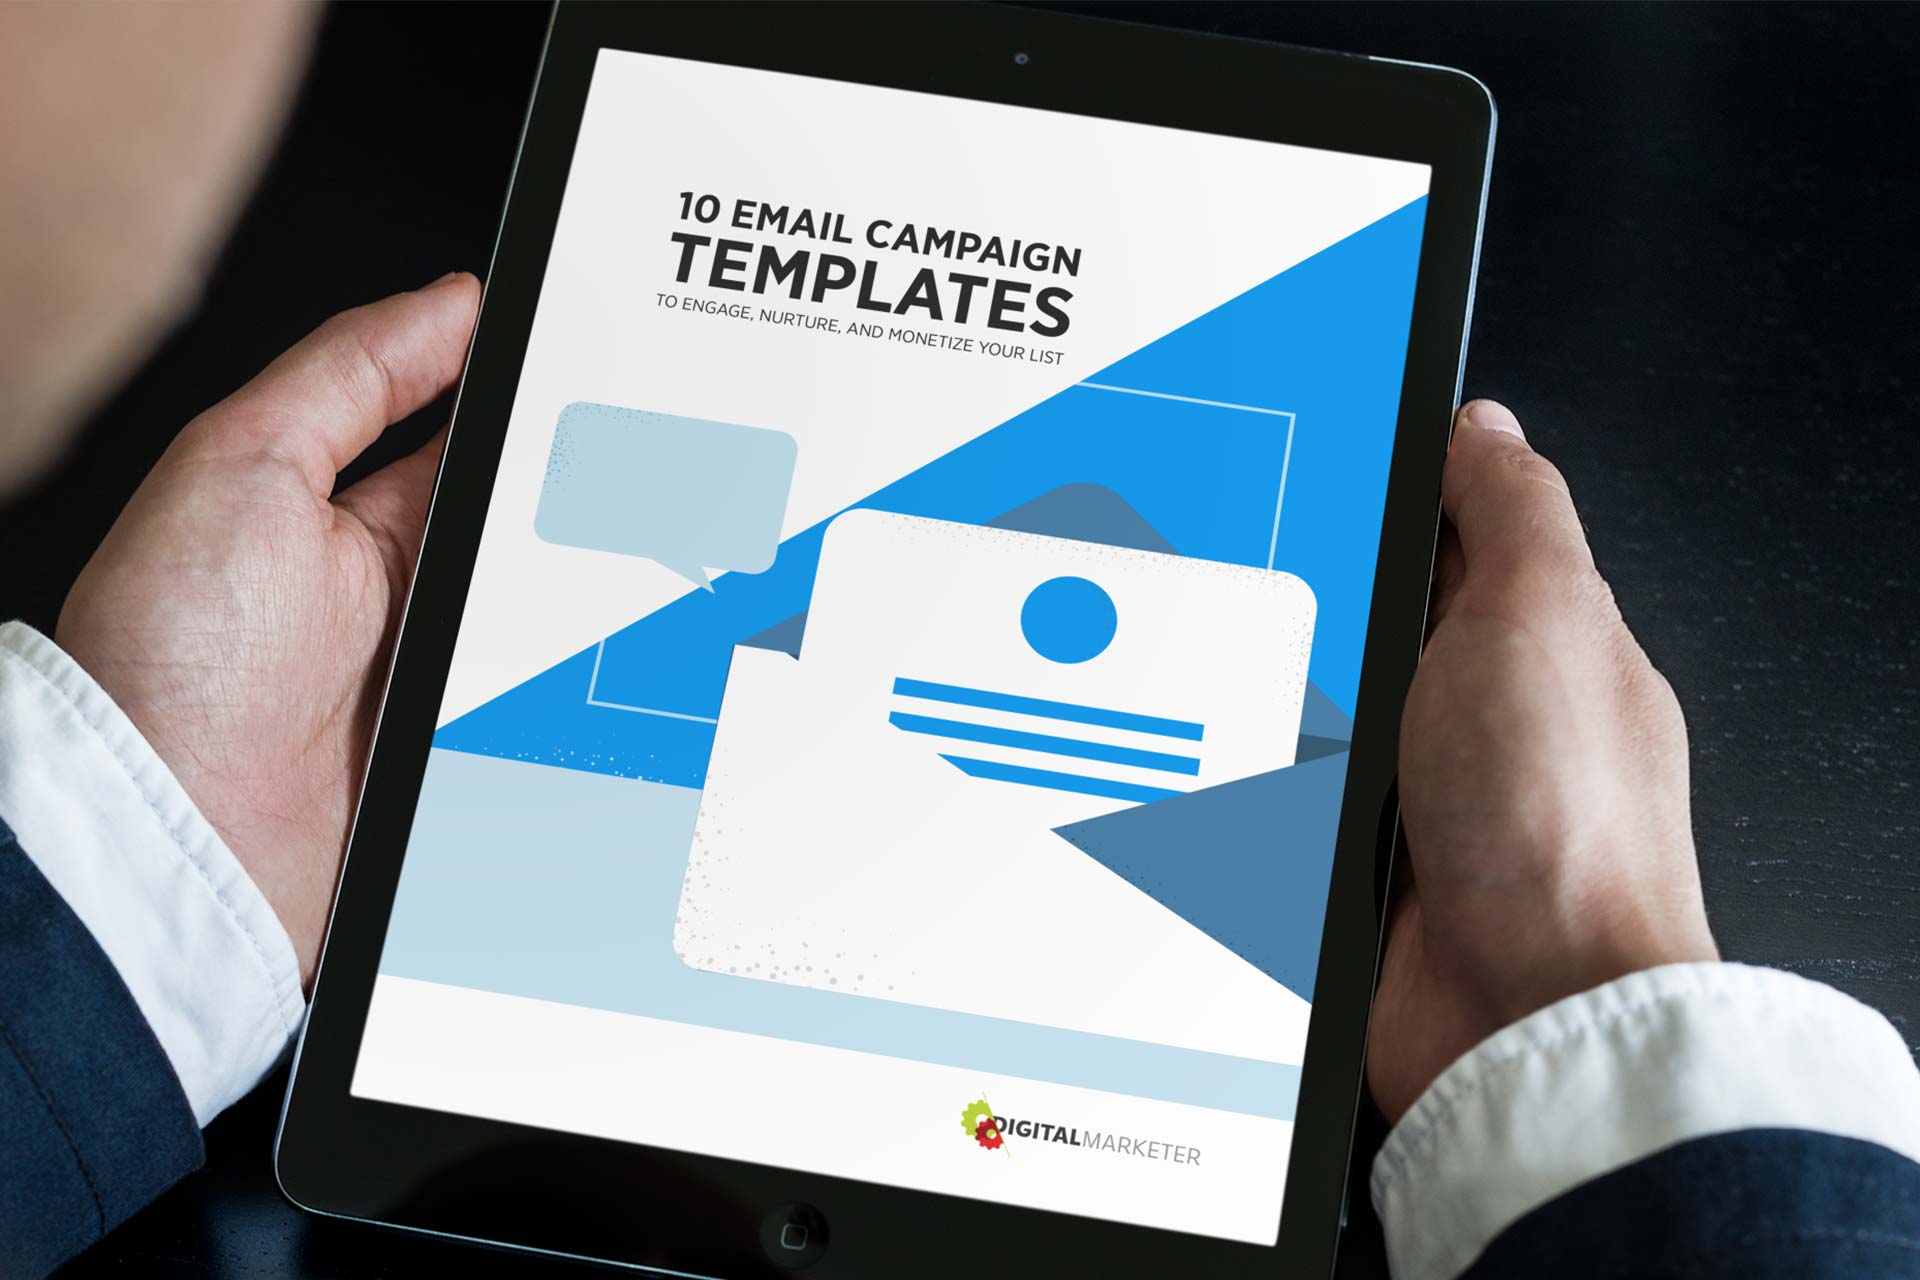 10 Action-Driving Email Campaign Templates